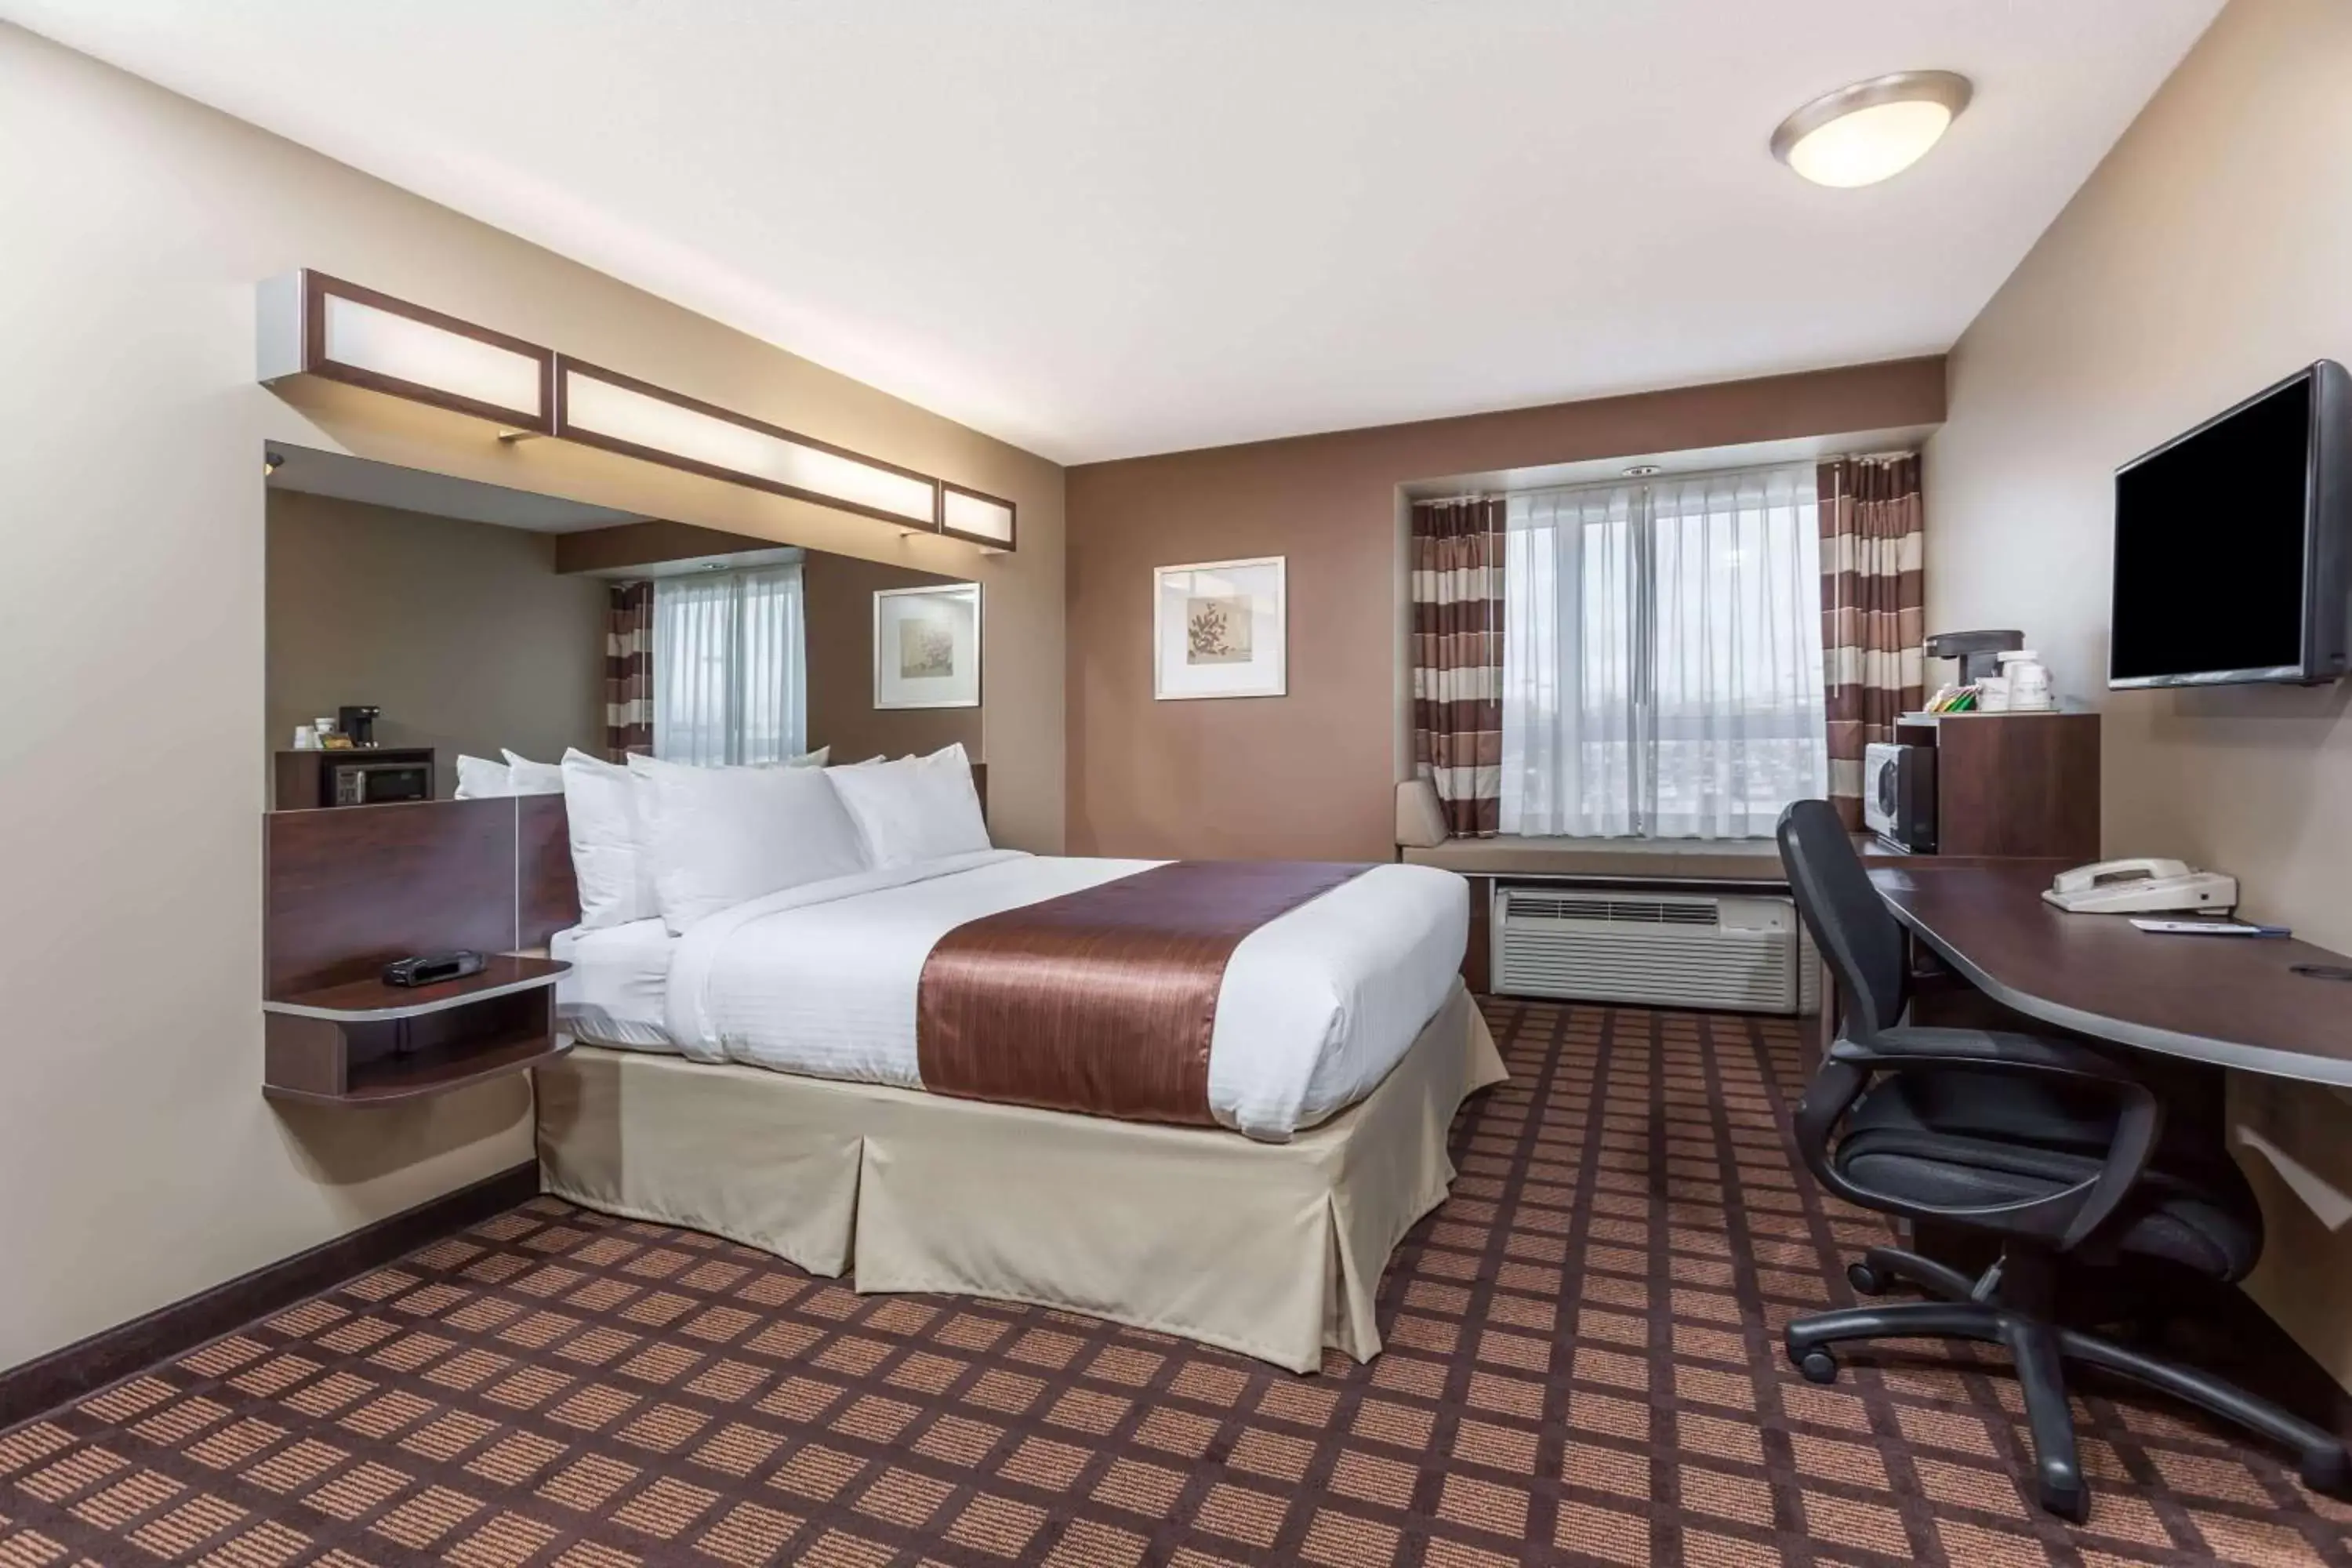 Photo of the whole room in Microtel Inn & Suites by Wyndham - Timmins